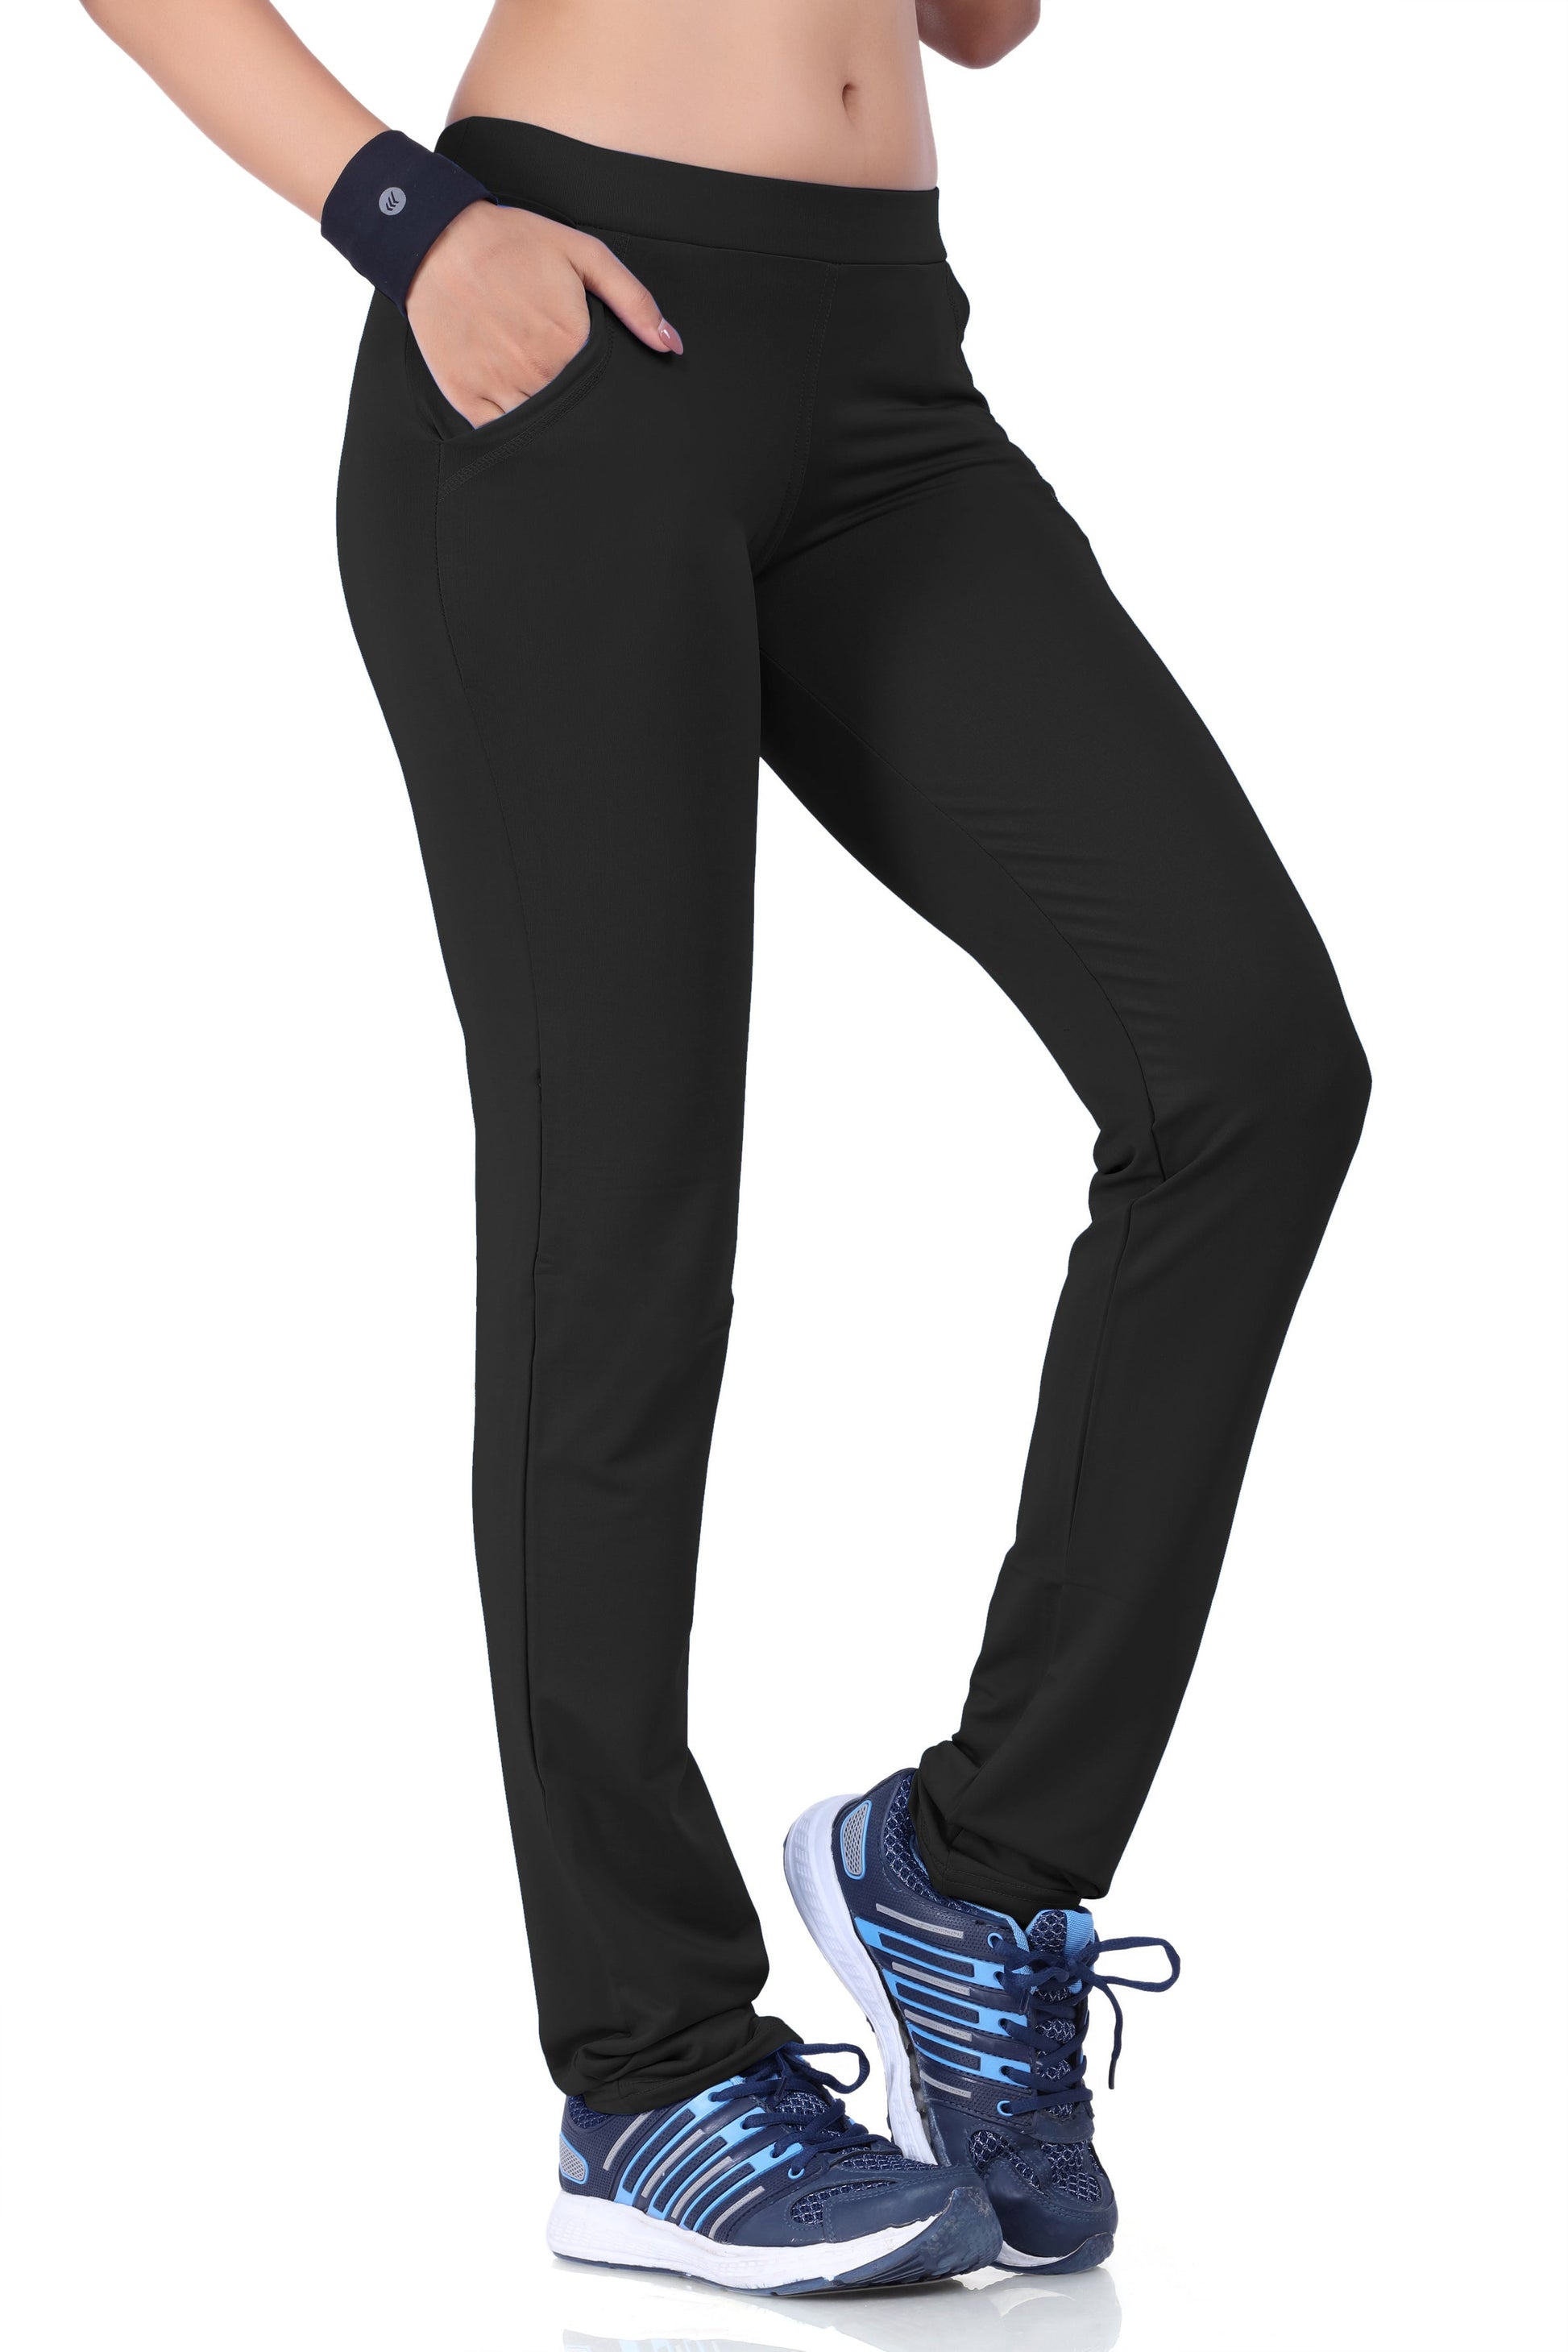 Women's Bootcut Yoga Pants with Pockets Moisture-Wicking High Waist Bootleg  Gym Fitness Trousers Plus Size Pant Stretch Yoga Workout Pants for Women